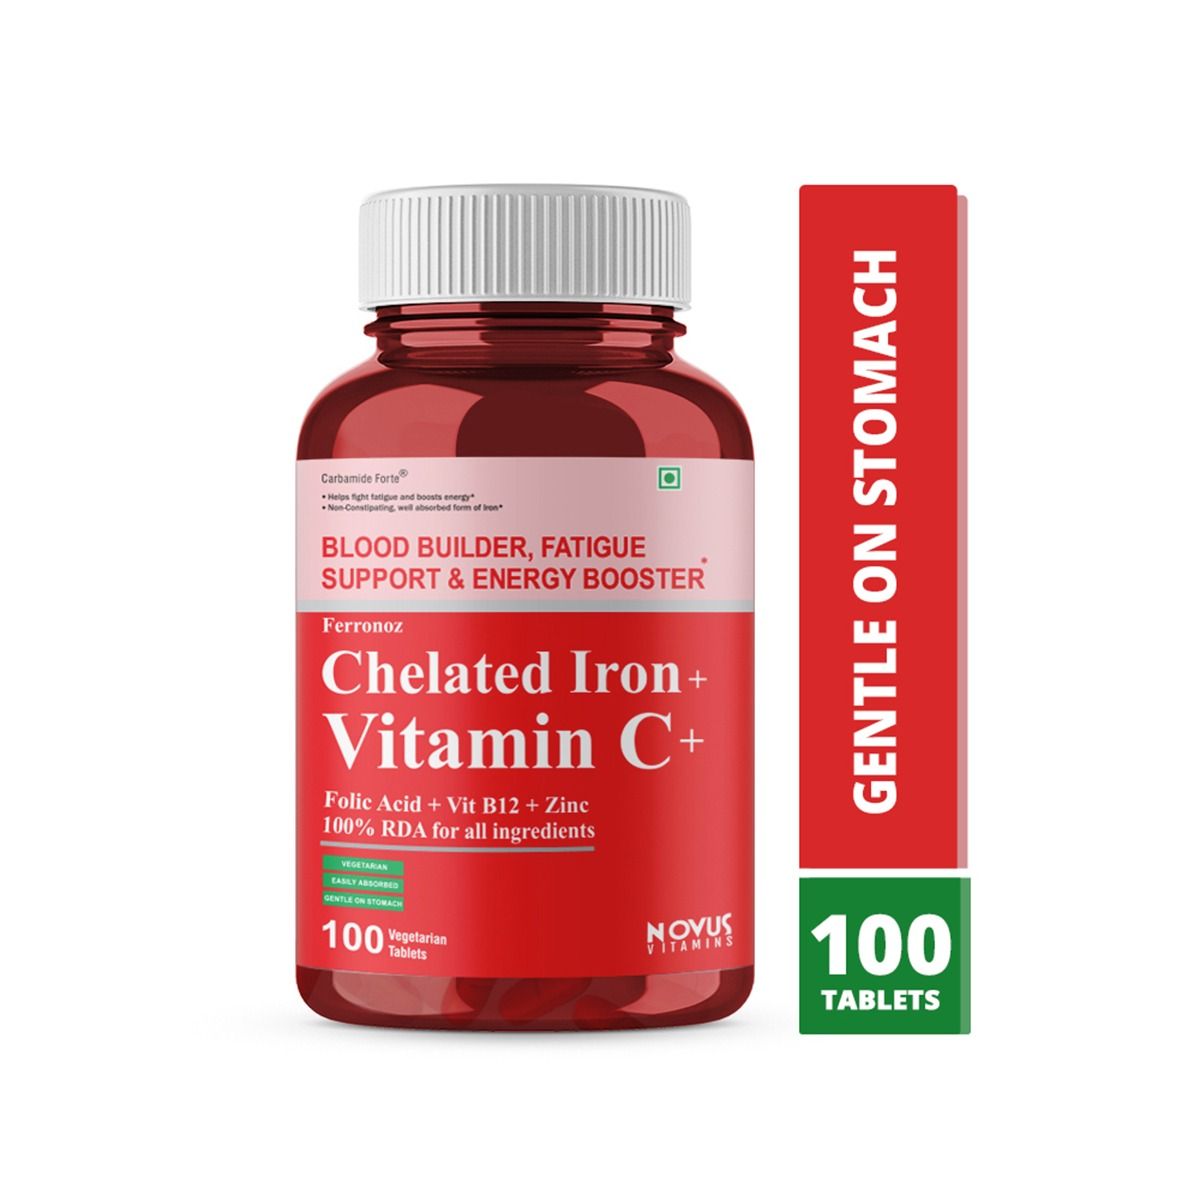 Buy Carbamide Forte Chelated Iron + Vitamin C + Vegetarian Tablets, 100 Count Online